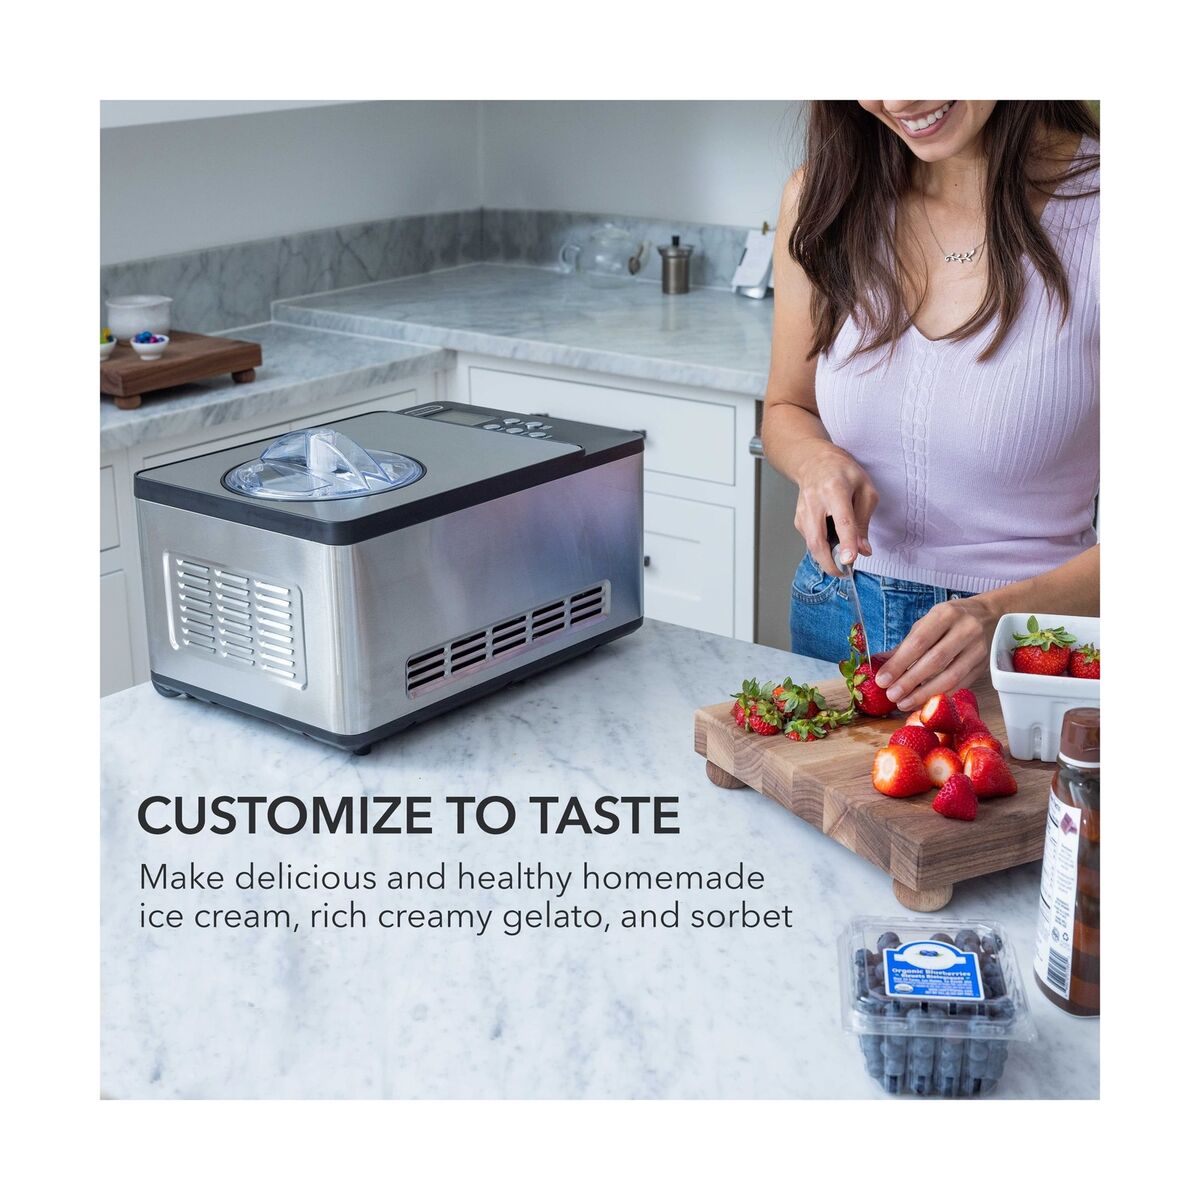 Whynter ICM-200LS Automatic Ice Cream Maker 2 Quart Capacity Stainless  Steel, 850956003576